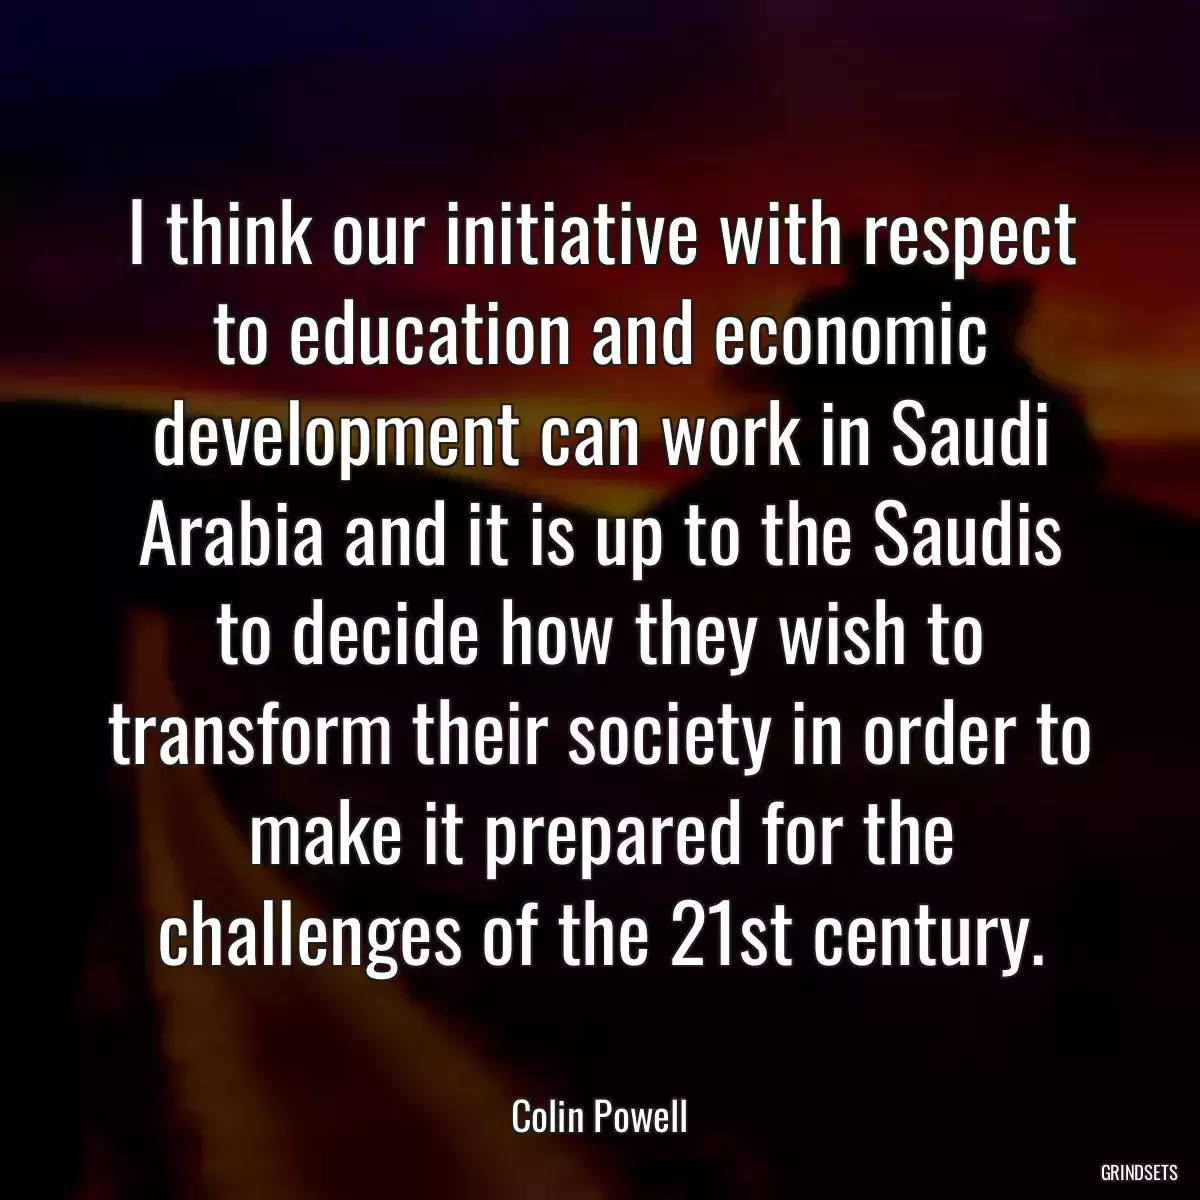 I think our initiative with respect to education and economic development can work in Saudi Arabia and it is up to the Saudis to decide how they wish to transform their society in order to make it prepared for the challenges of the 21st century.